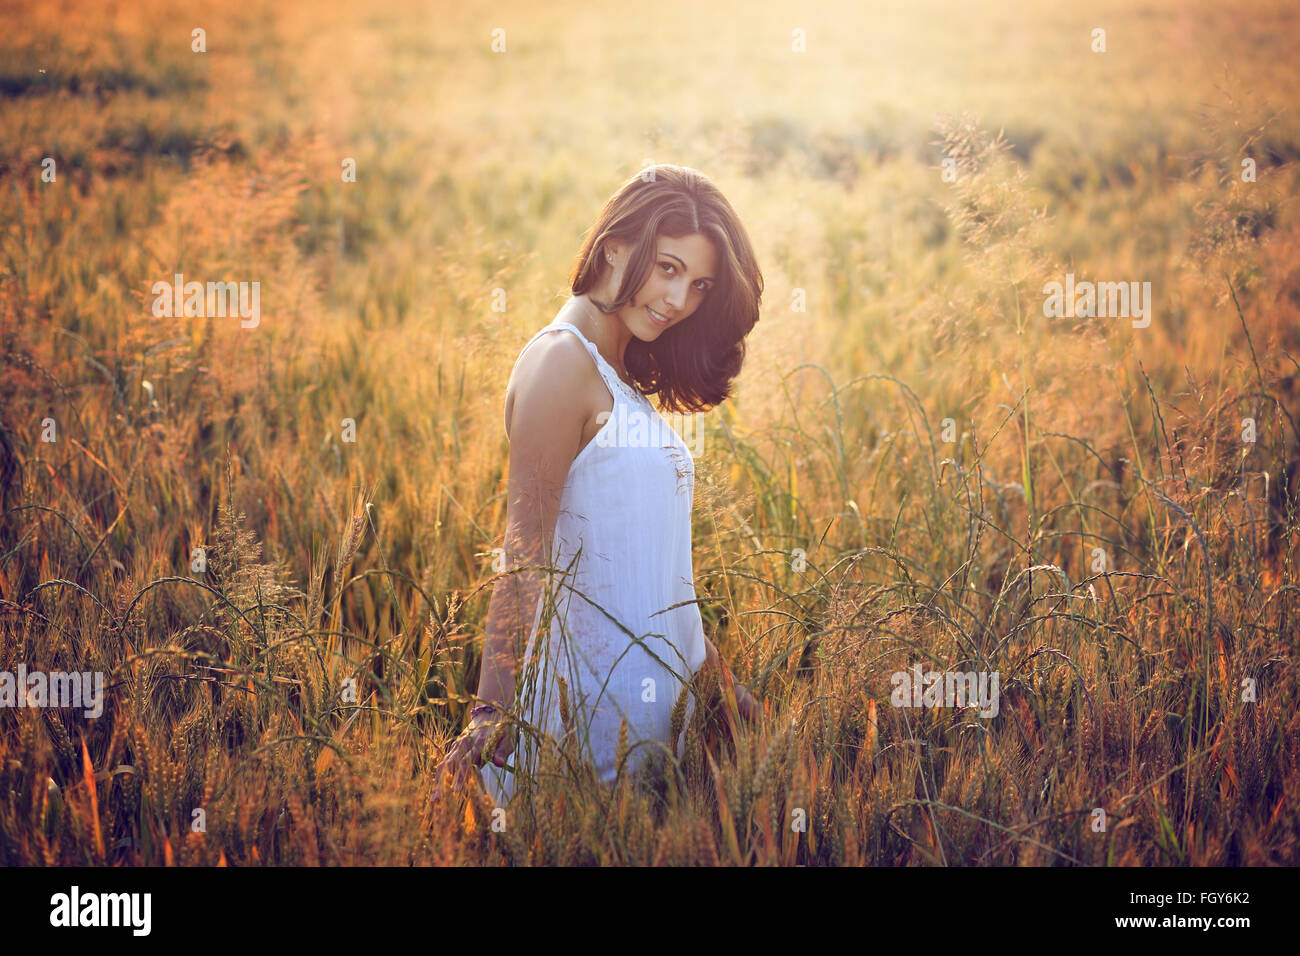 Beautiful young woman in a summer field. Warm sunset light portrait Stock Photo